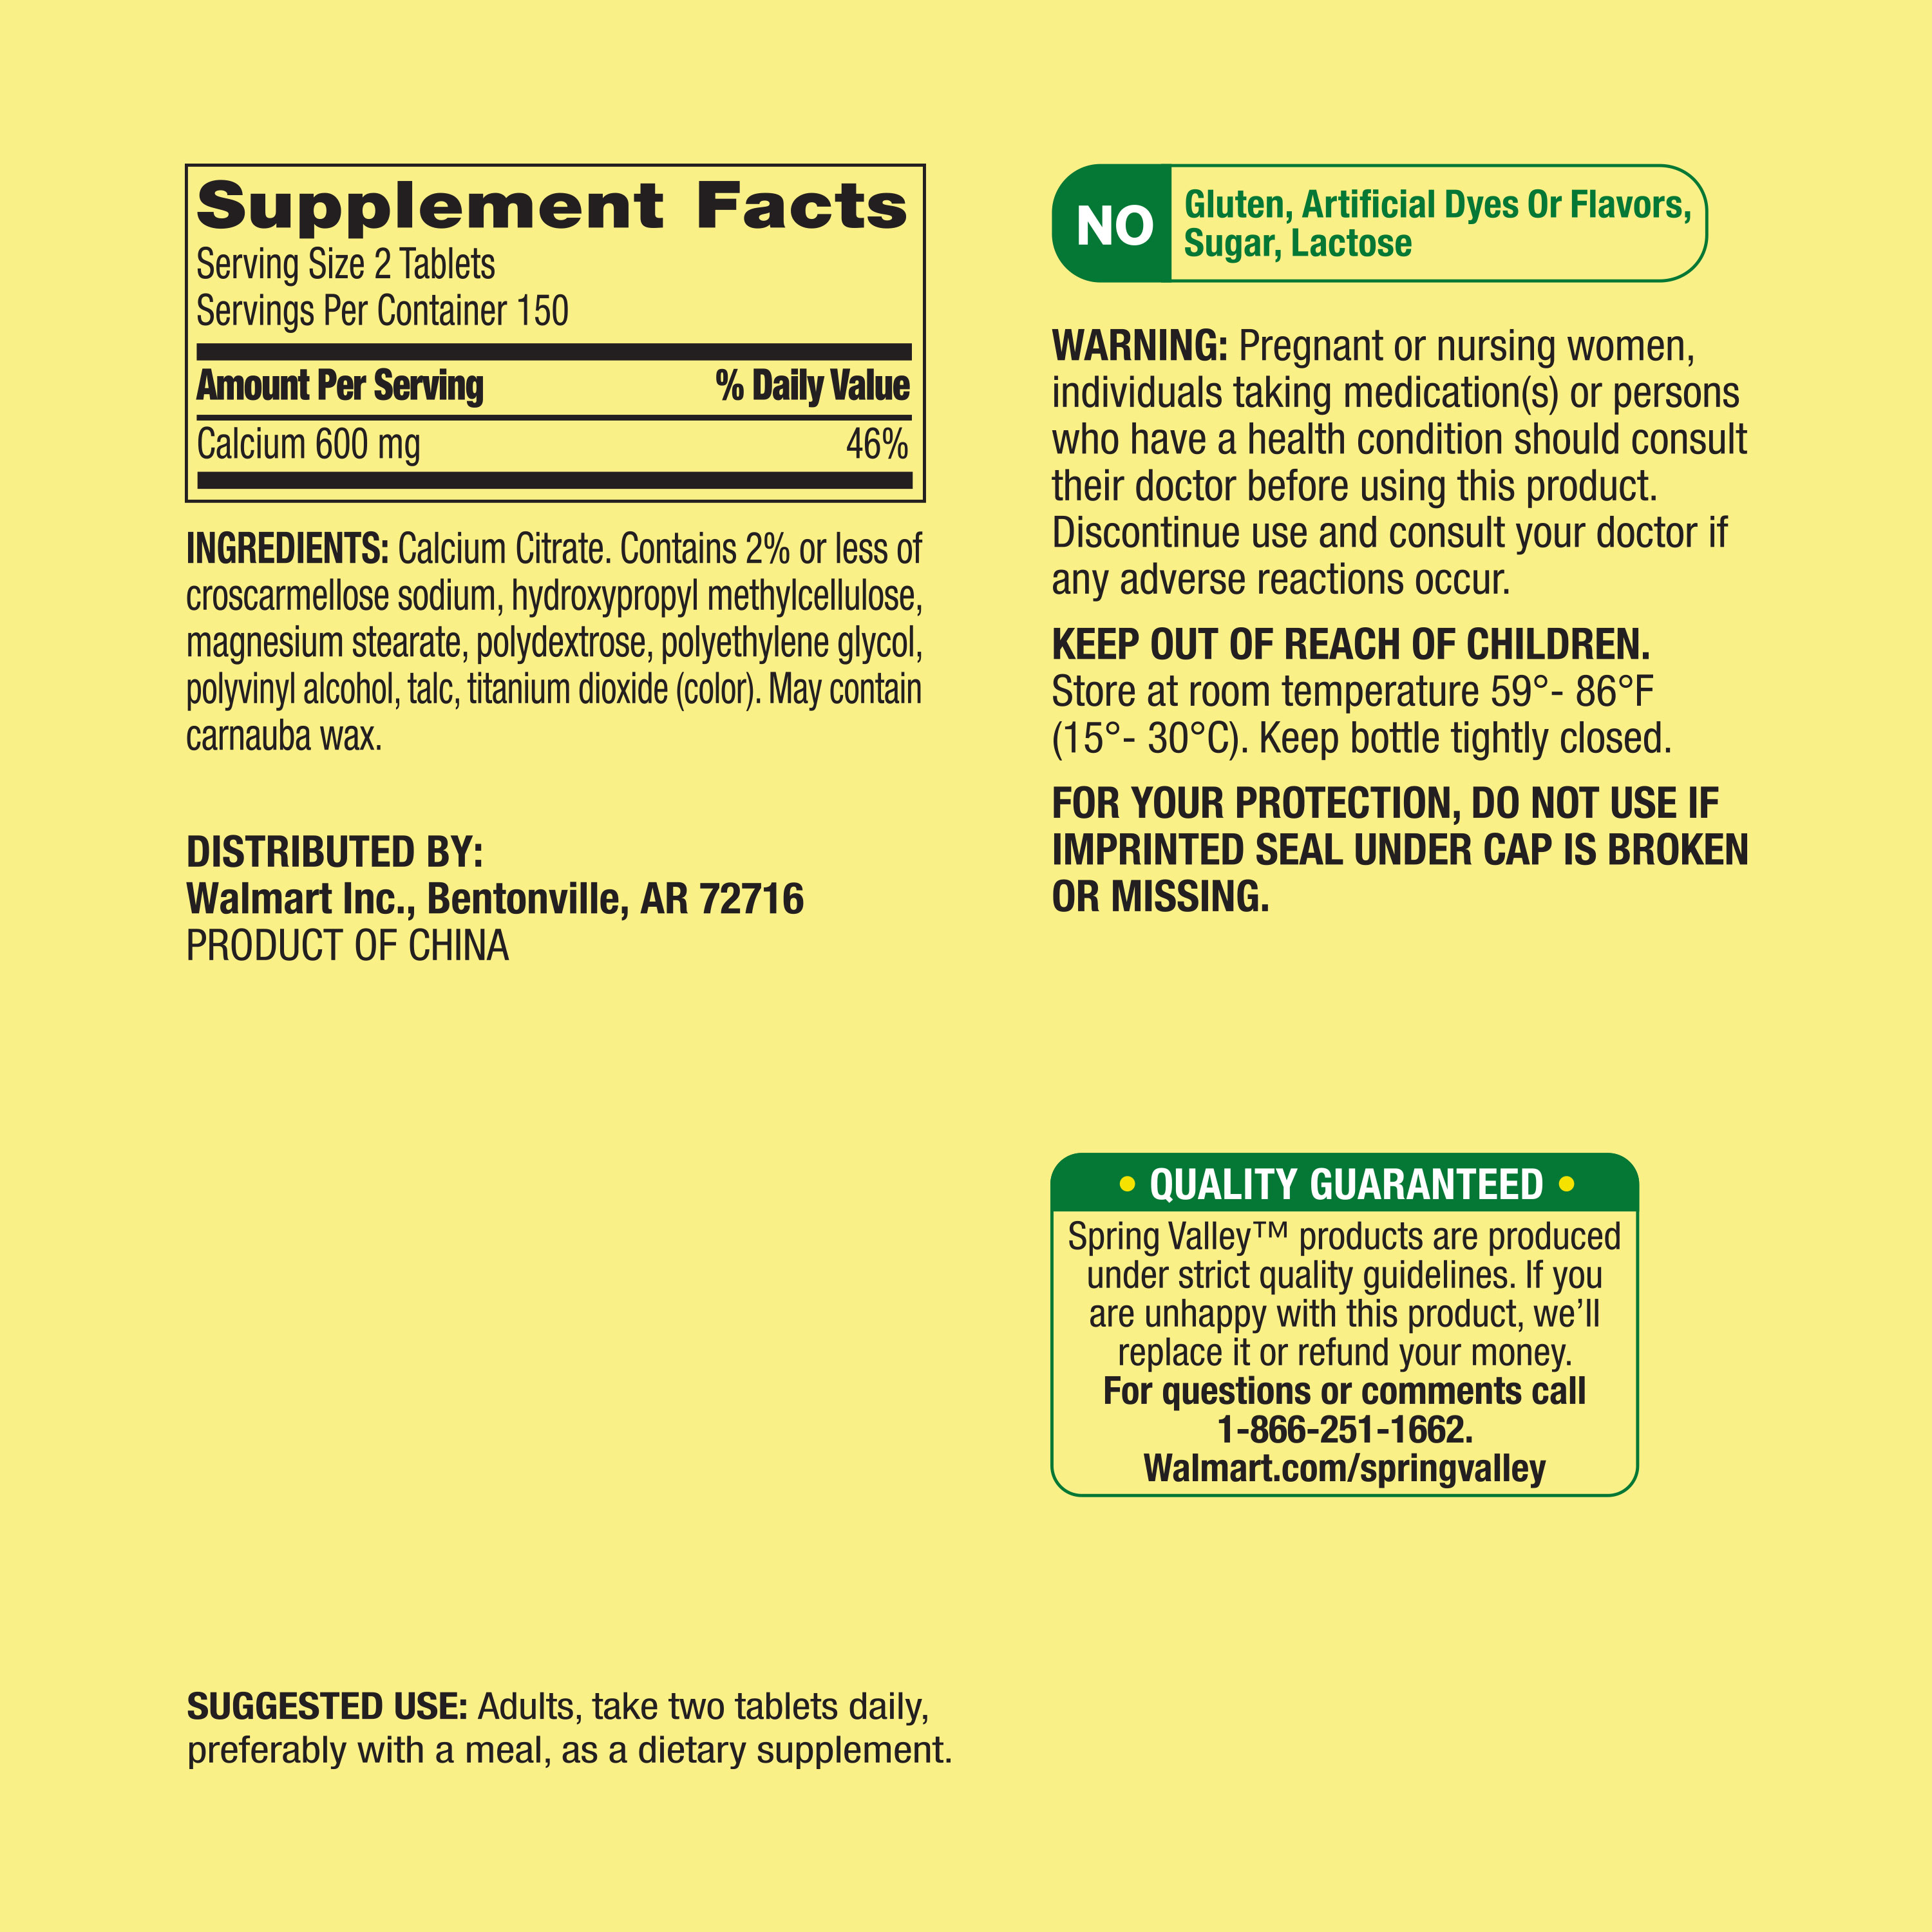 Spring Valley Calcium Citrate Tablets Dietary Supplement, 600 mg, 300 Count - image 3 of 8